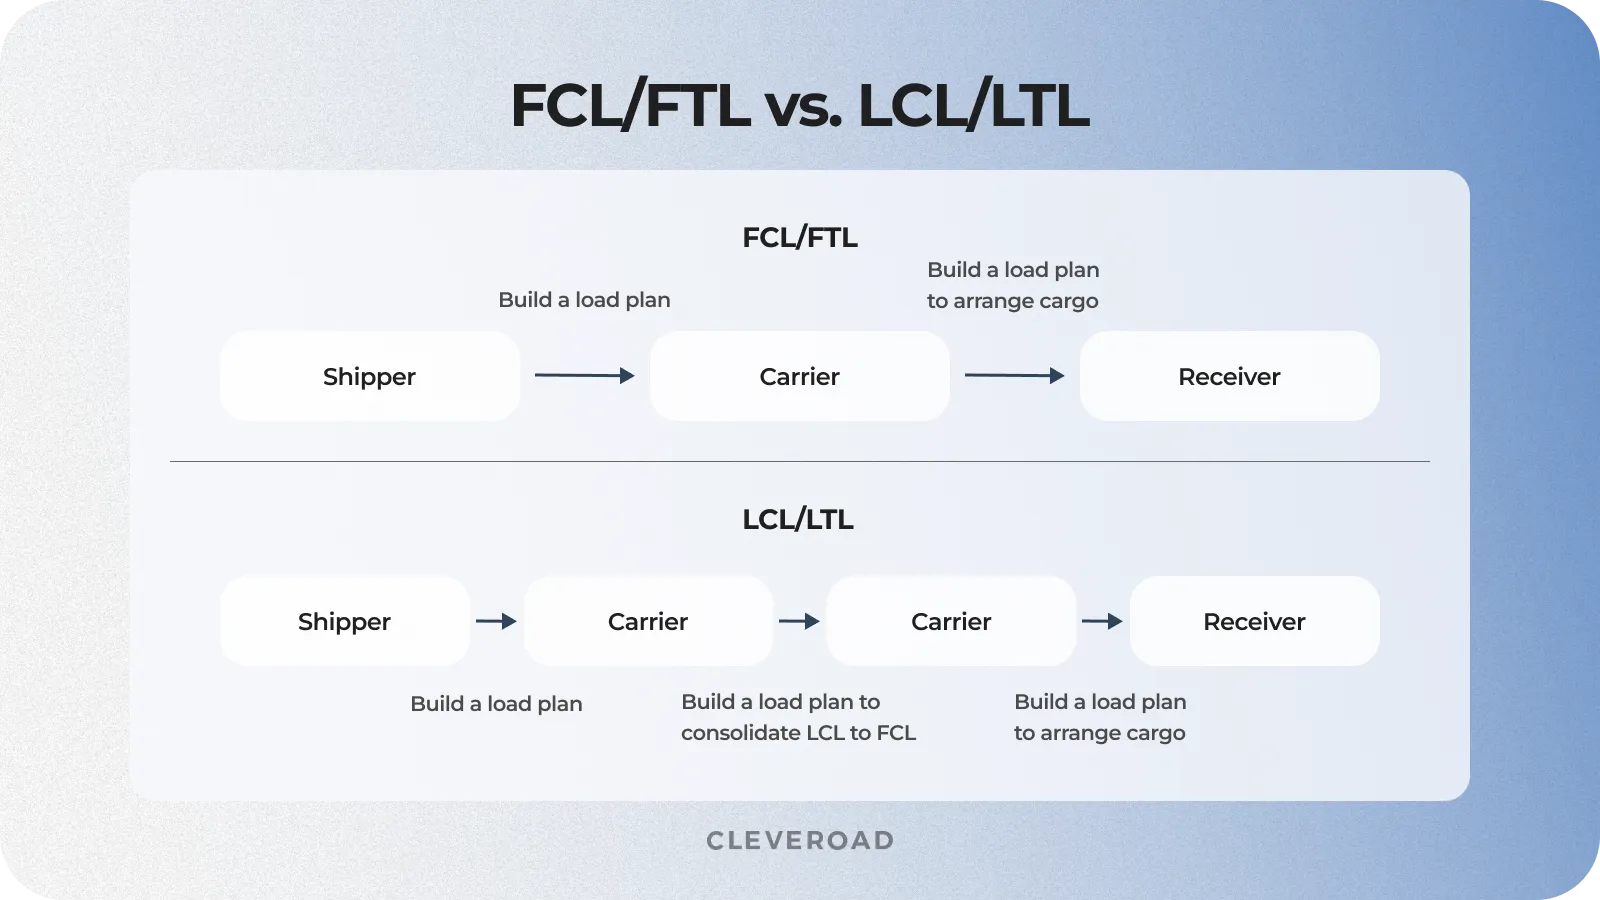 FCL and FTL shipping versus LCL and LTL shipping